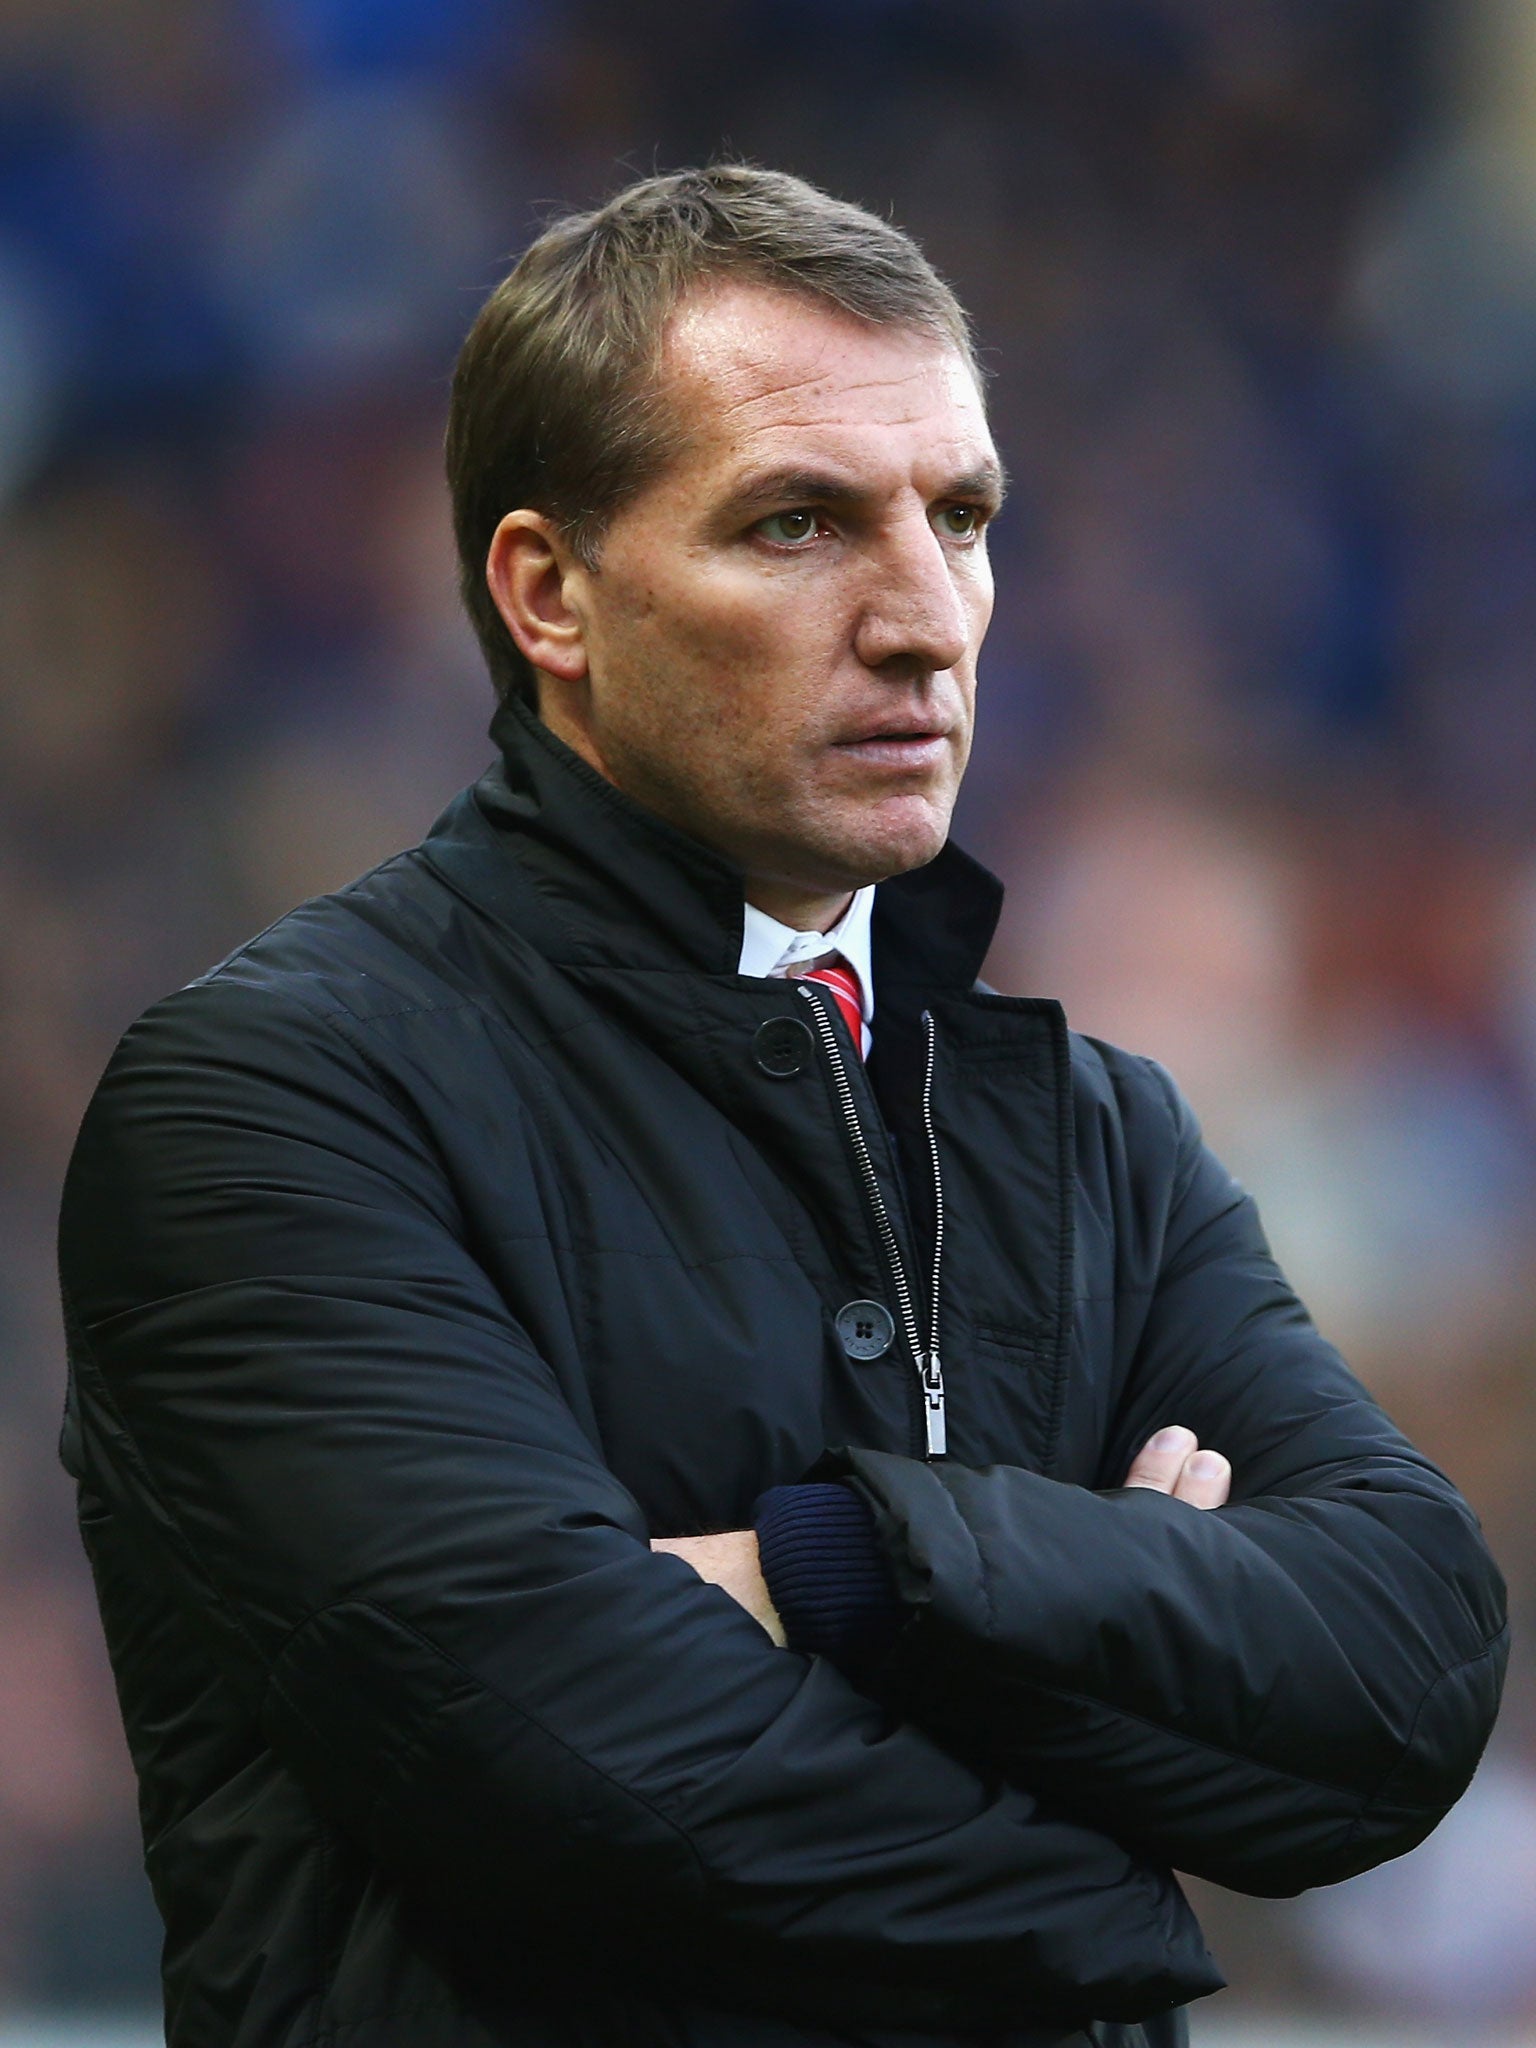 'I am responsible because I pick the team,' said Brendan Rodgers about Liverpool's defeat at Hull